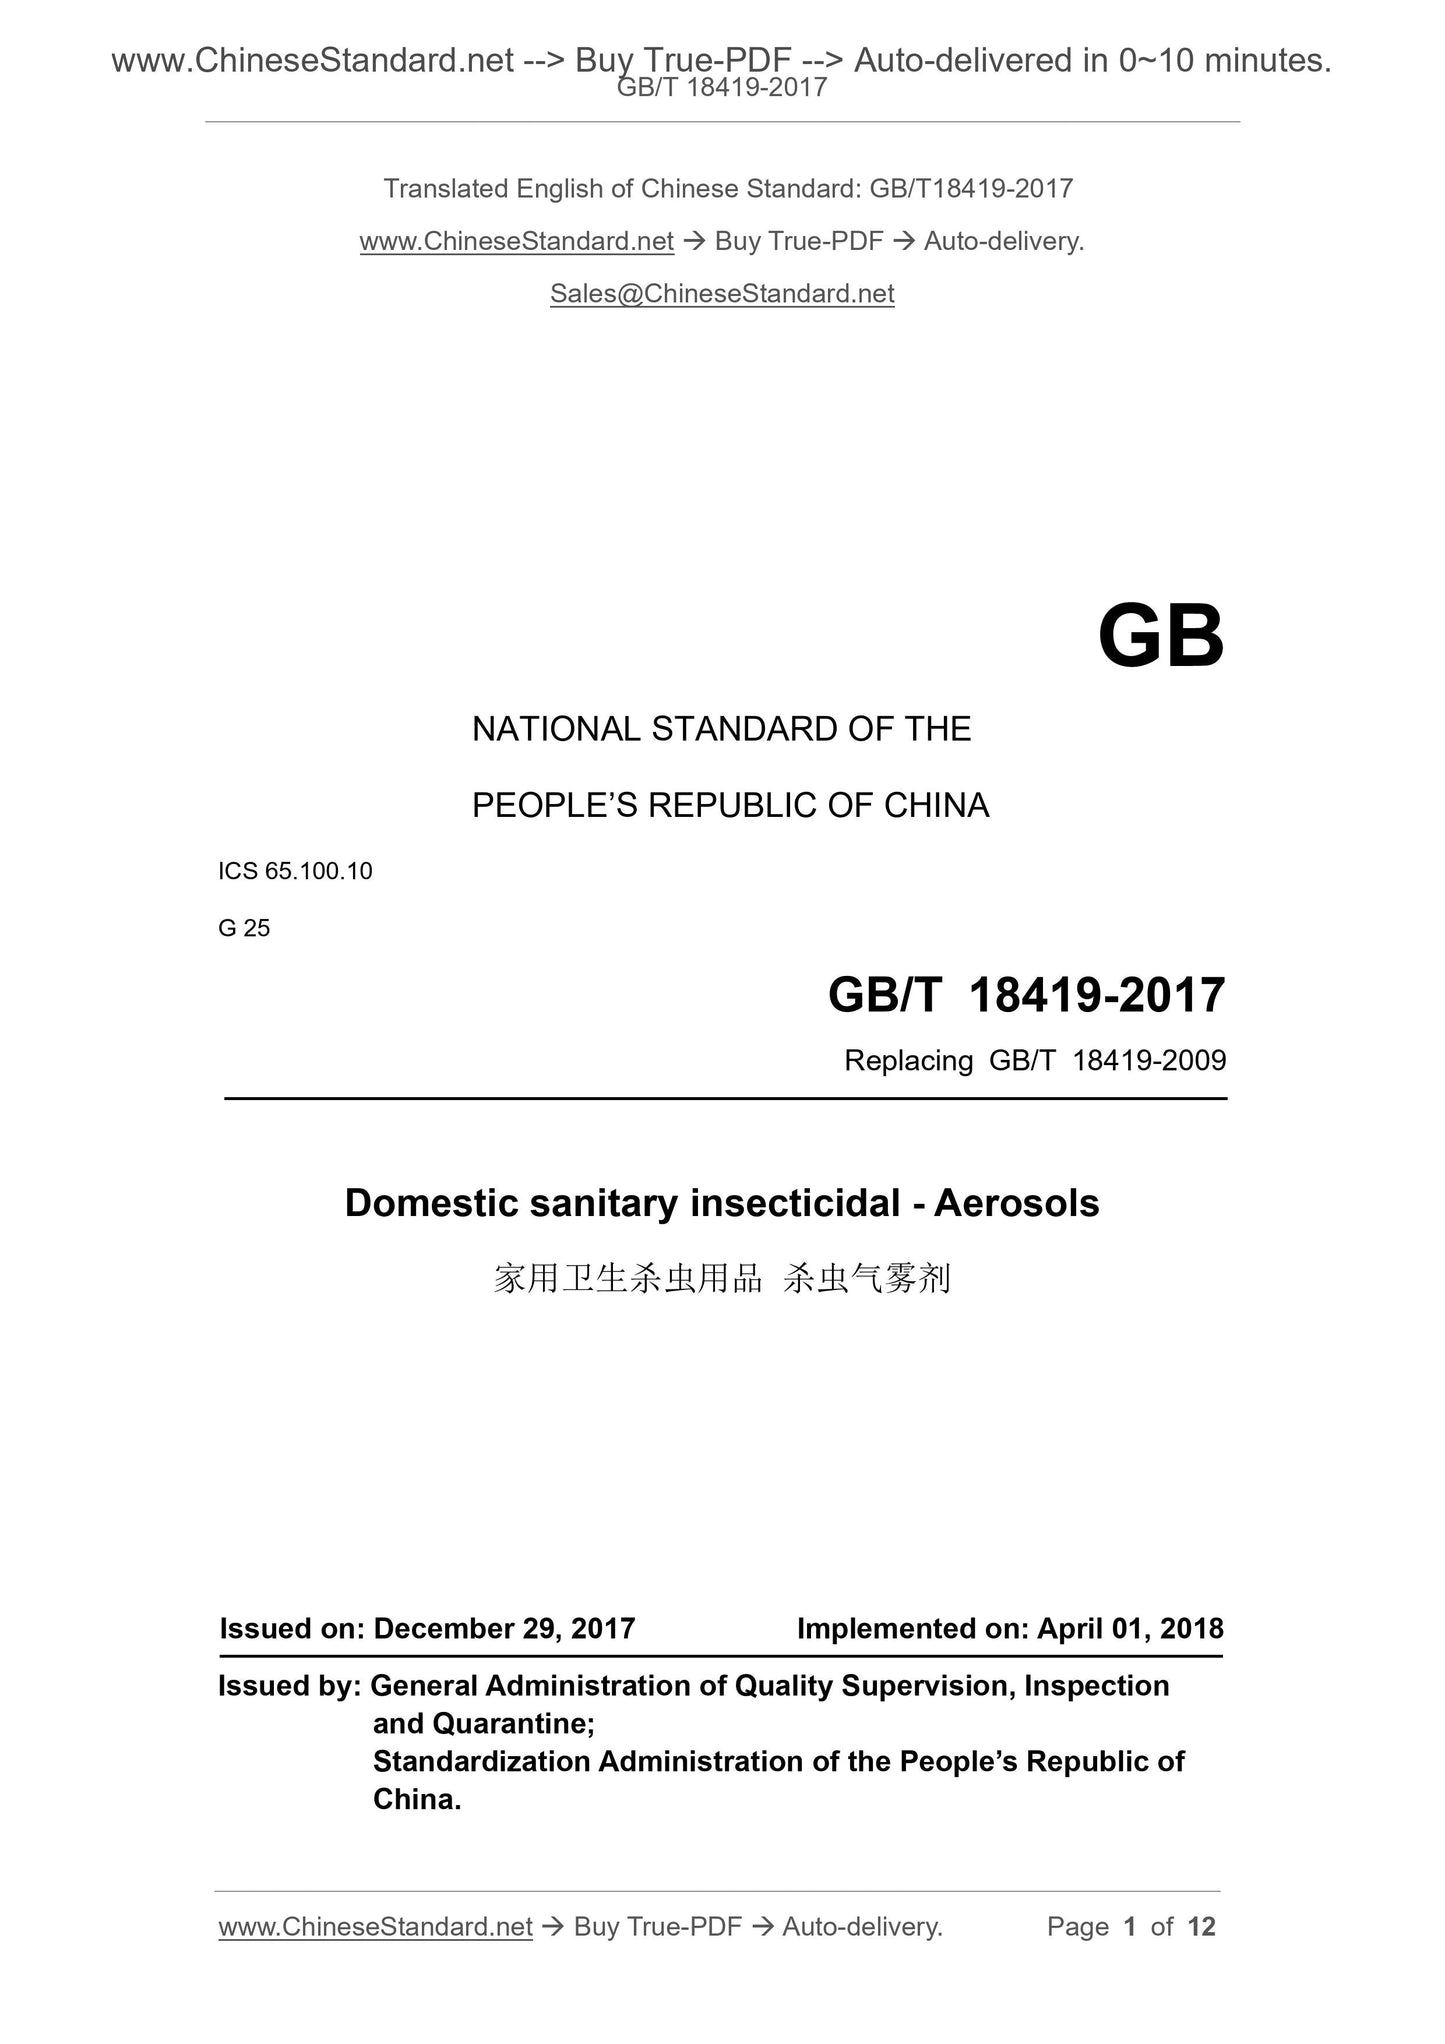 GB/T 18419-2017 Page 1